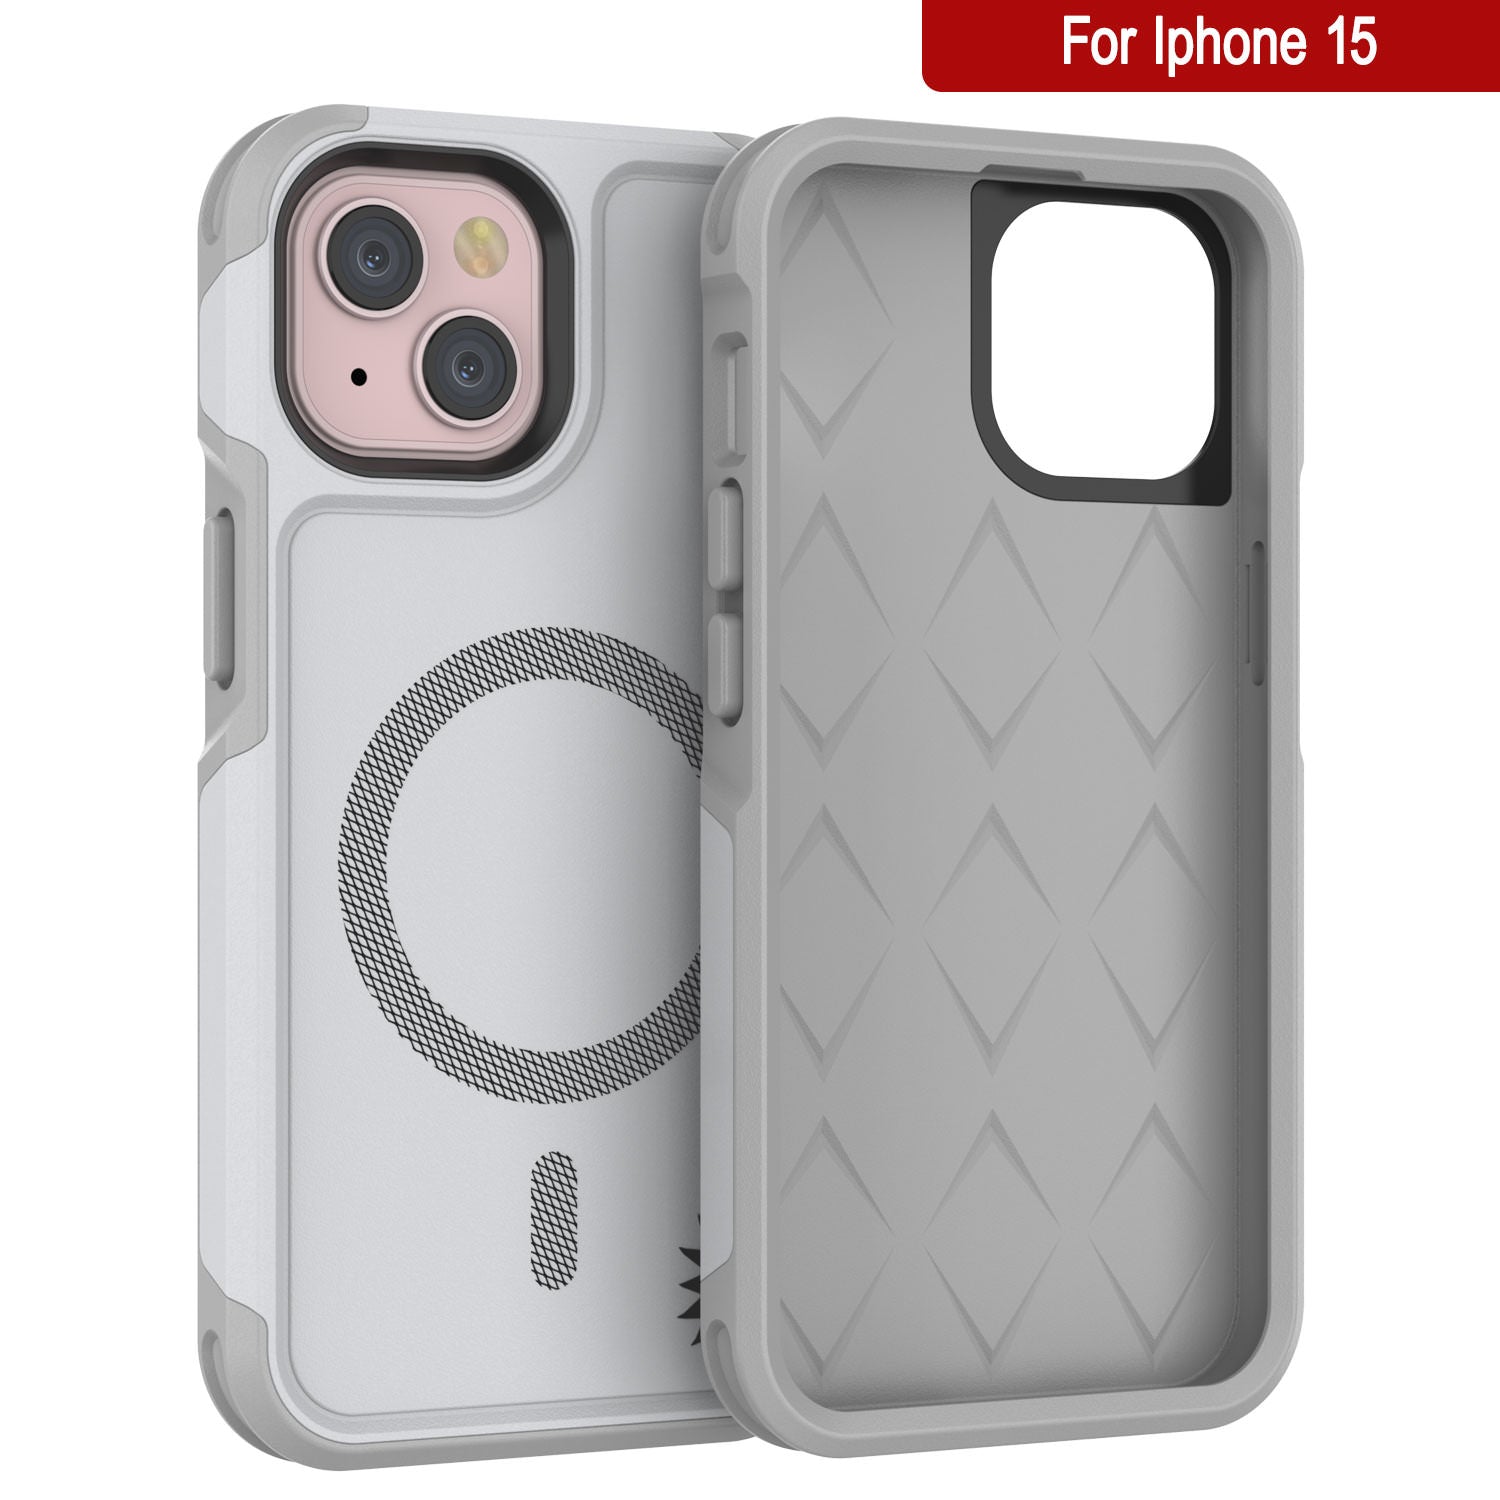 PunkCase iPhone 15 Case, [Spartan 2.0 Series] Clear Rugged Heavy Duty Cover W/Built in Screen Protector [white]